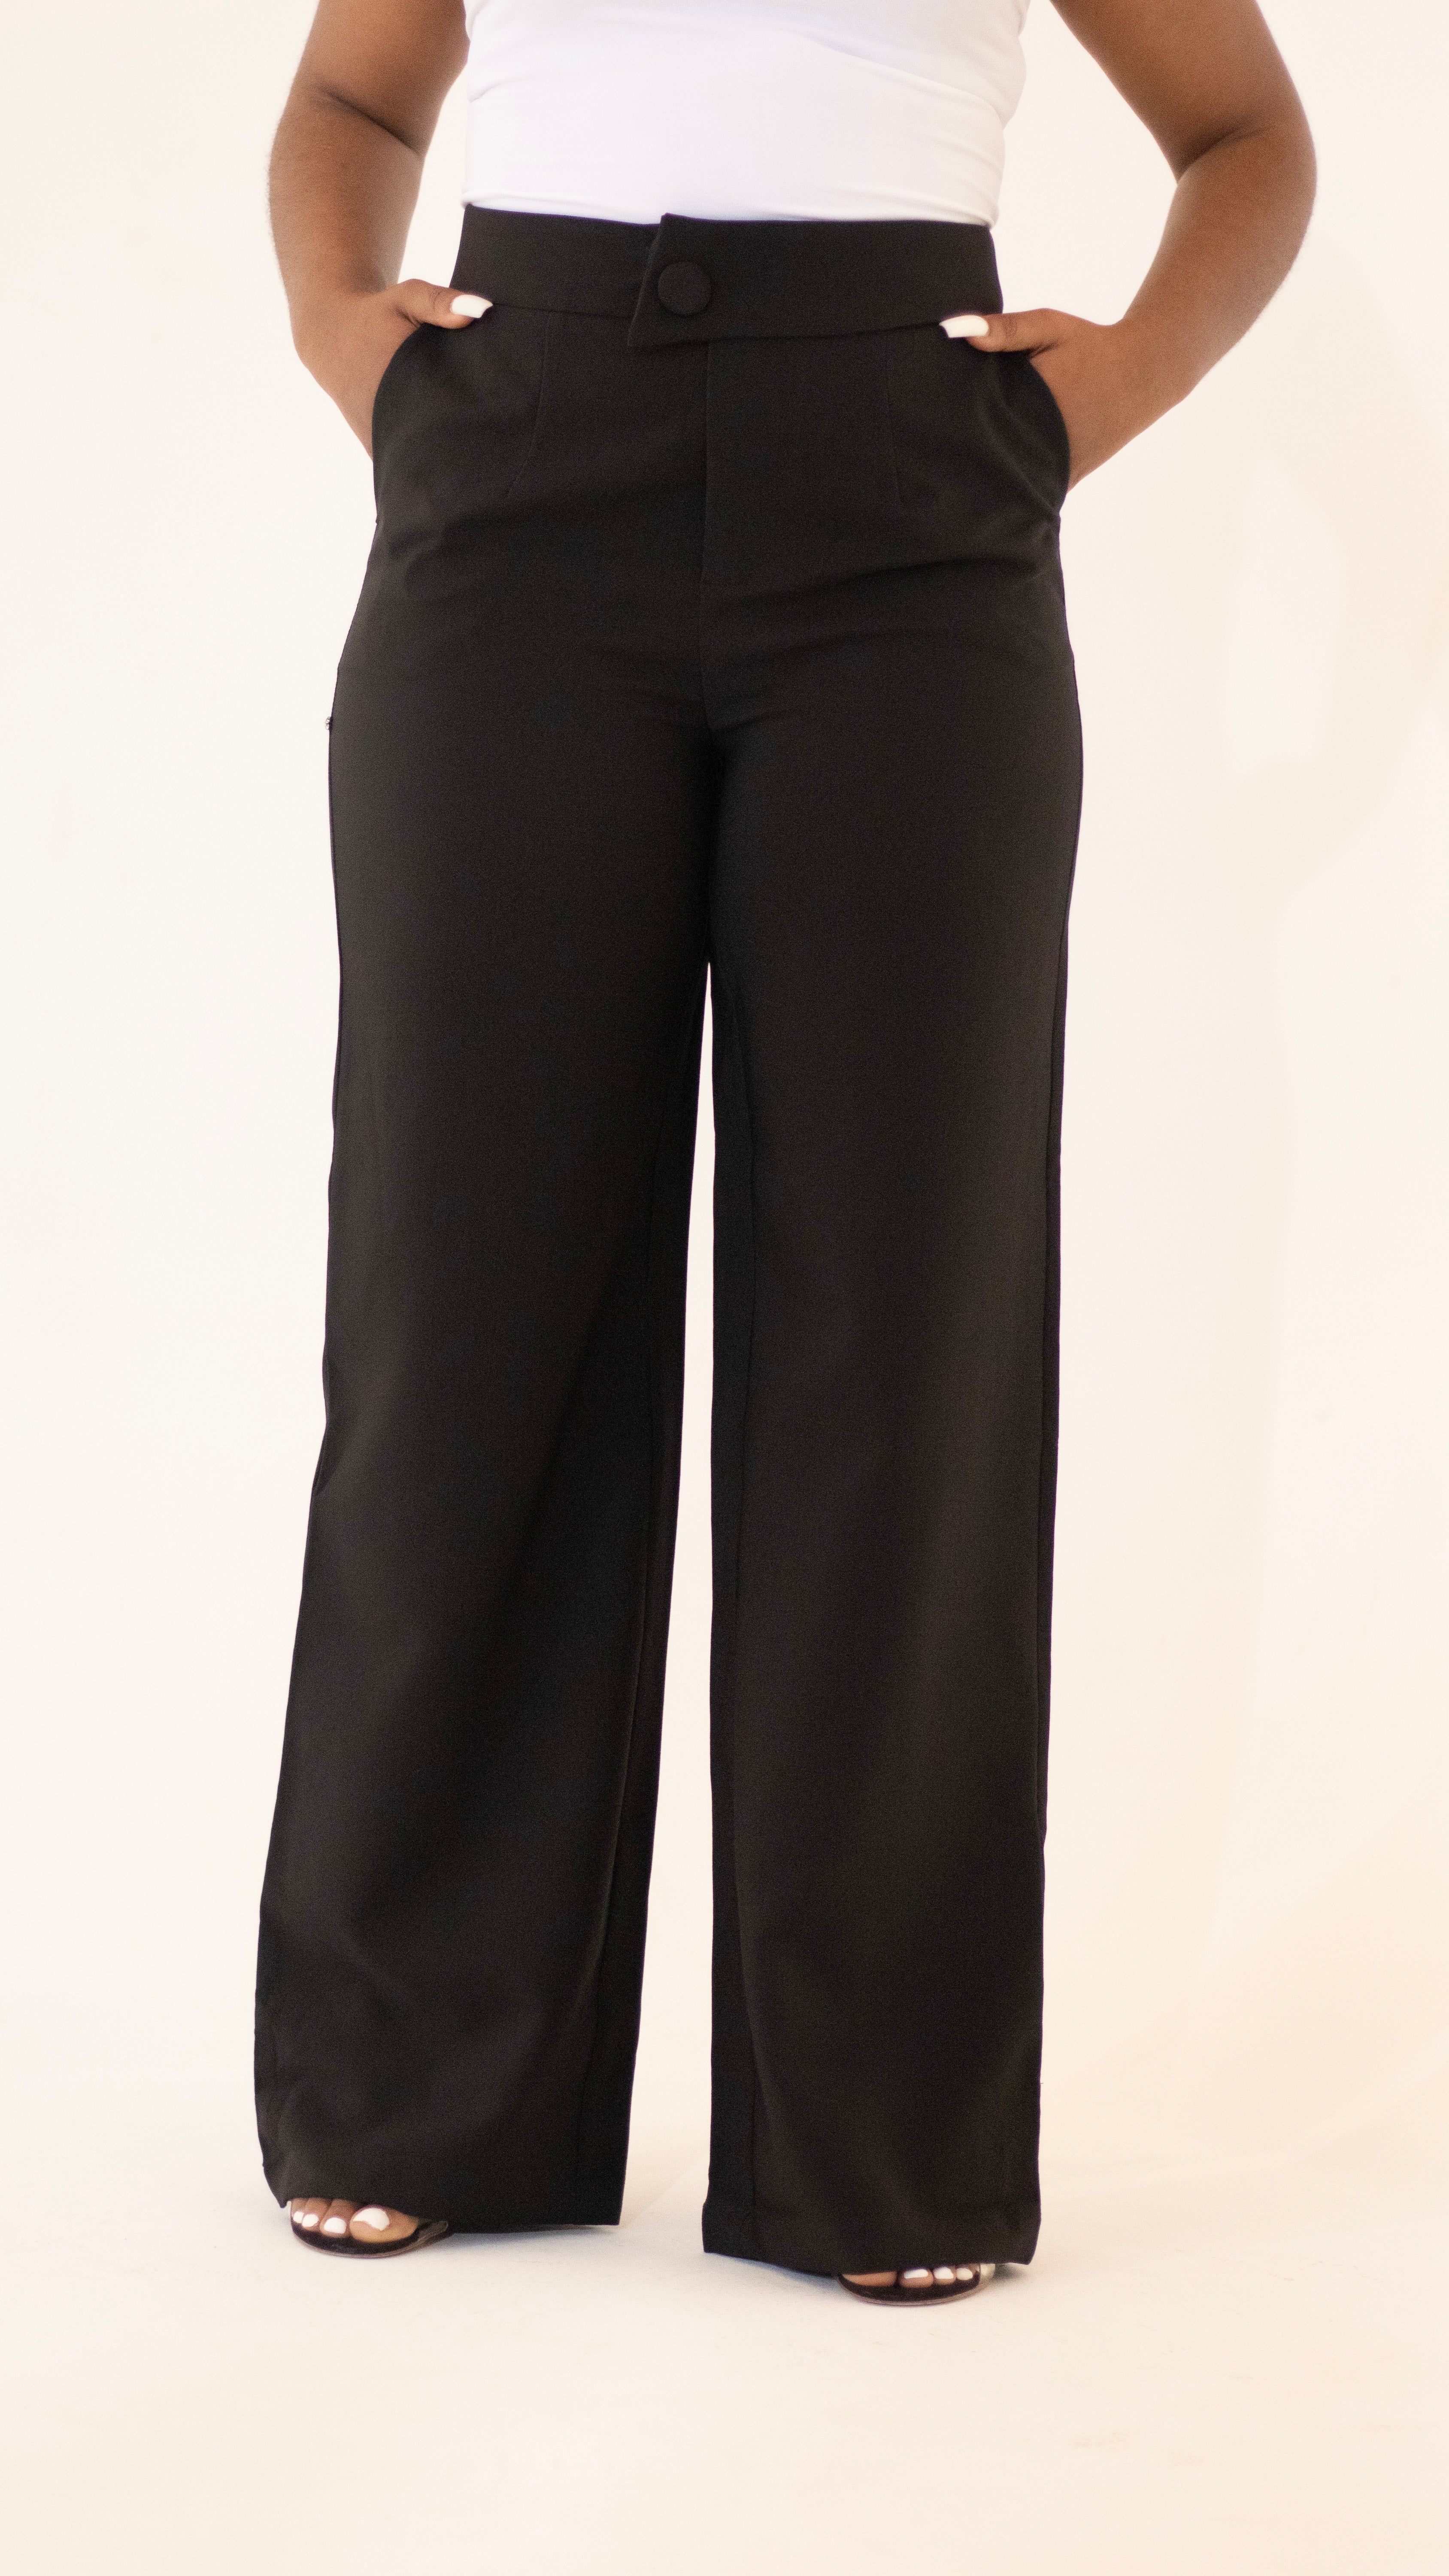 Women's high-waisted black dress pants with pockets